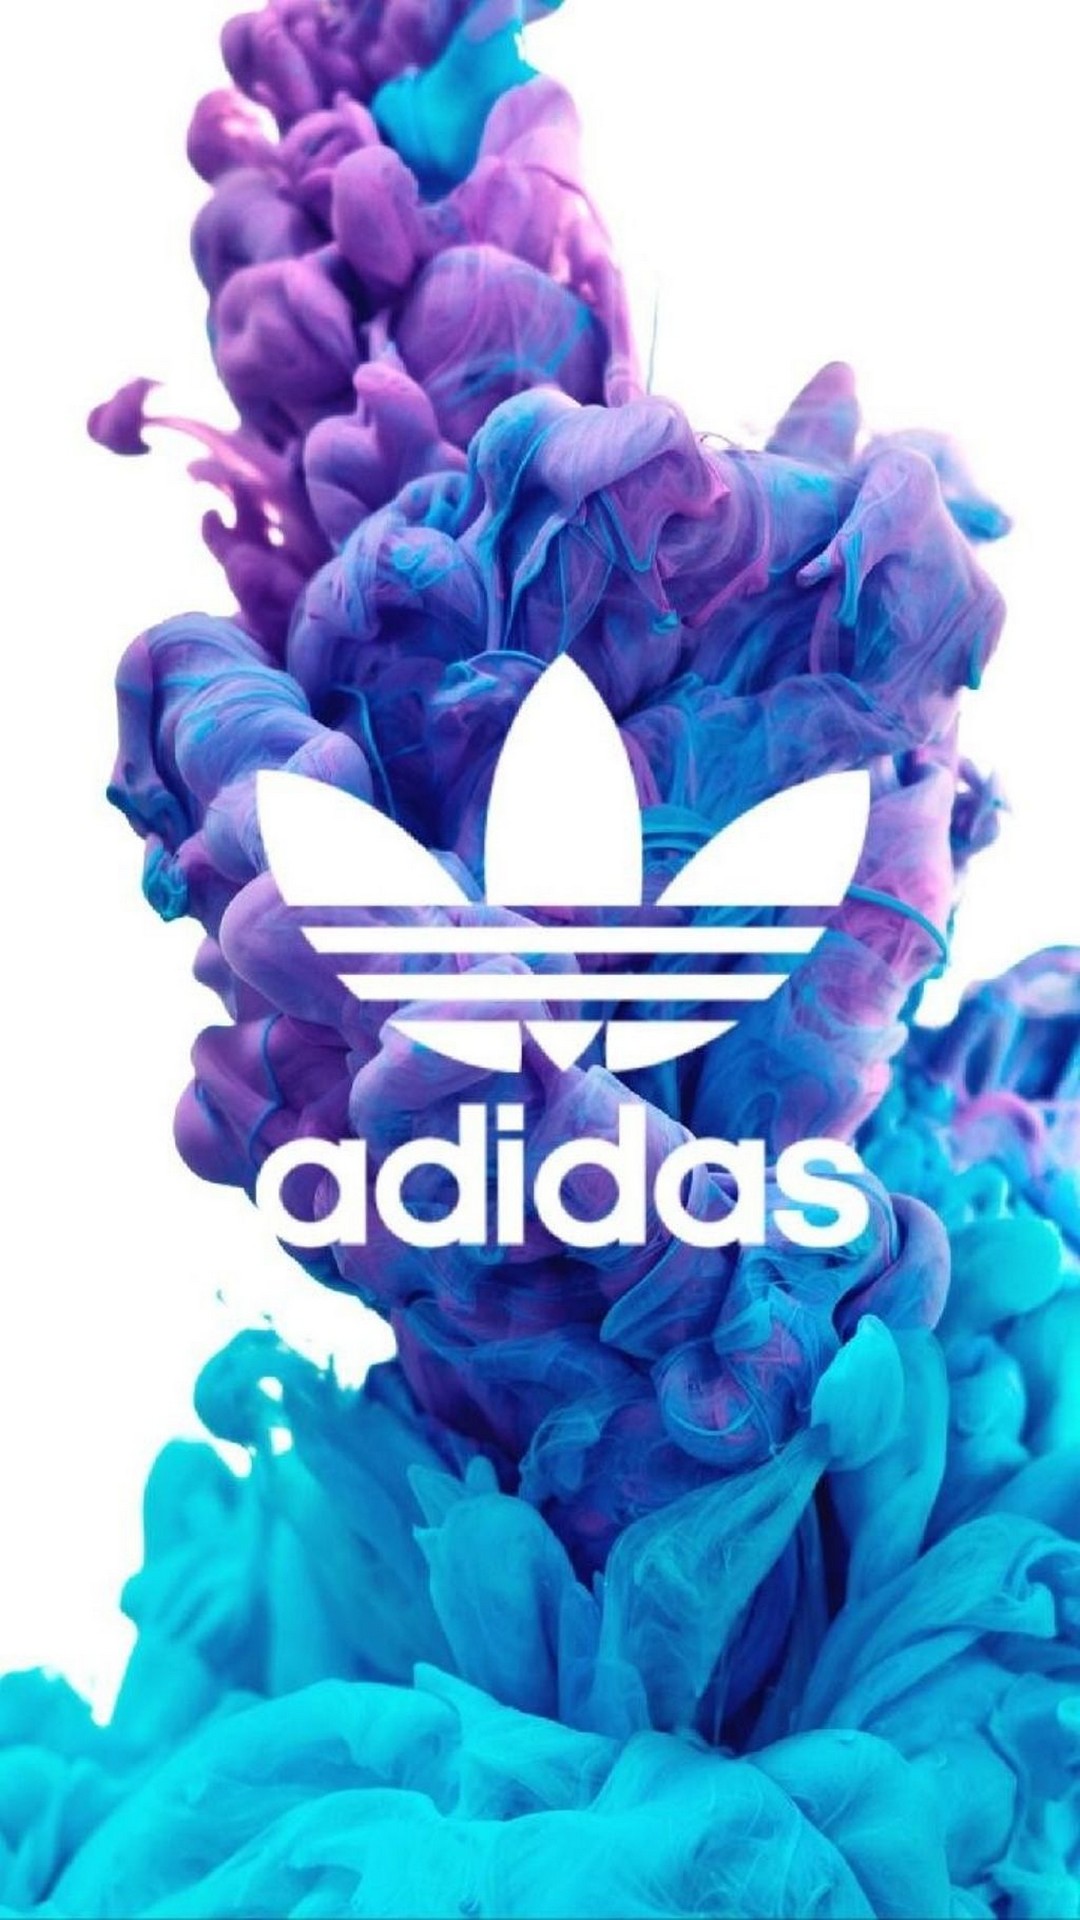 Adidas Cell Phones Wallpaper with high-resolution 1080x1920 pixel. Download all Mobile Wallpapers and Use them as wallpapers for your iPhone, Tablet, iPad, Android and other mobile devices